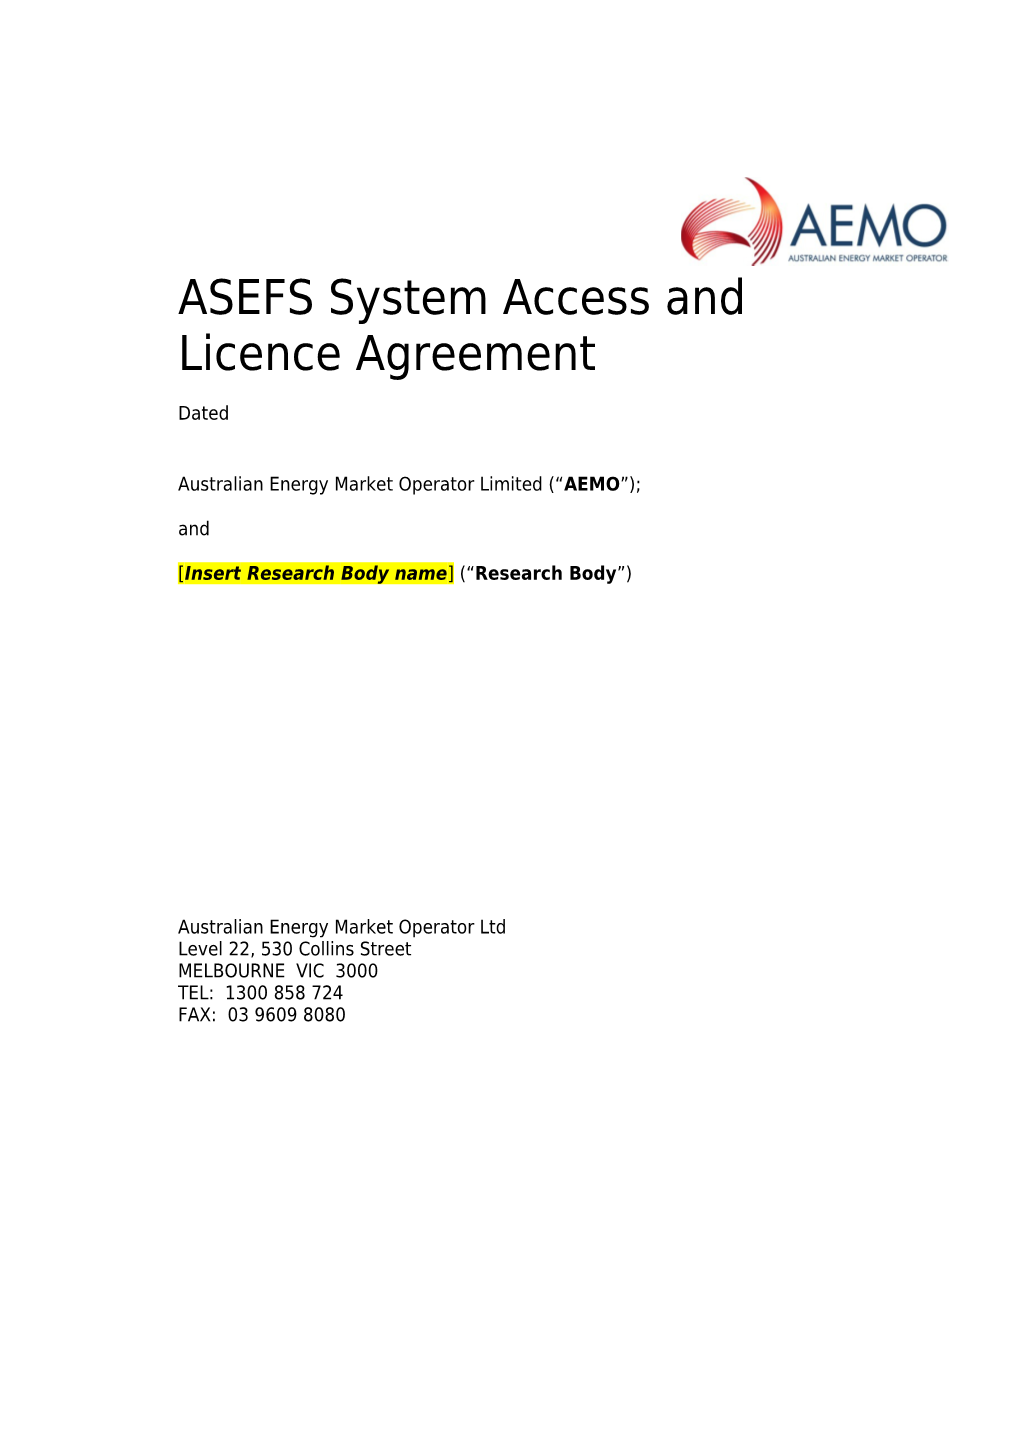 ASEFS System Access and Licence Agreement Final